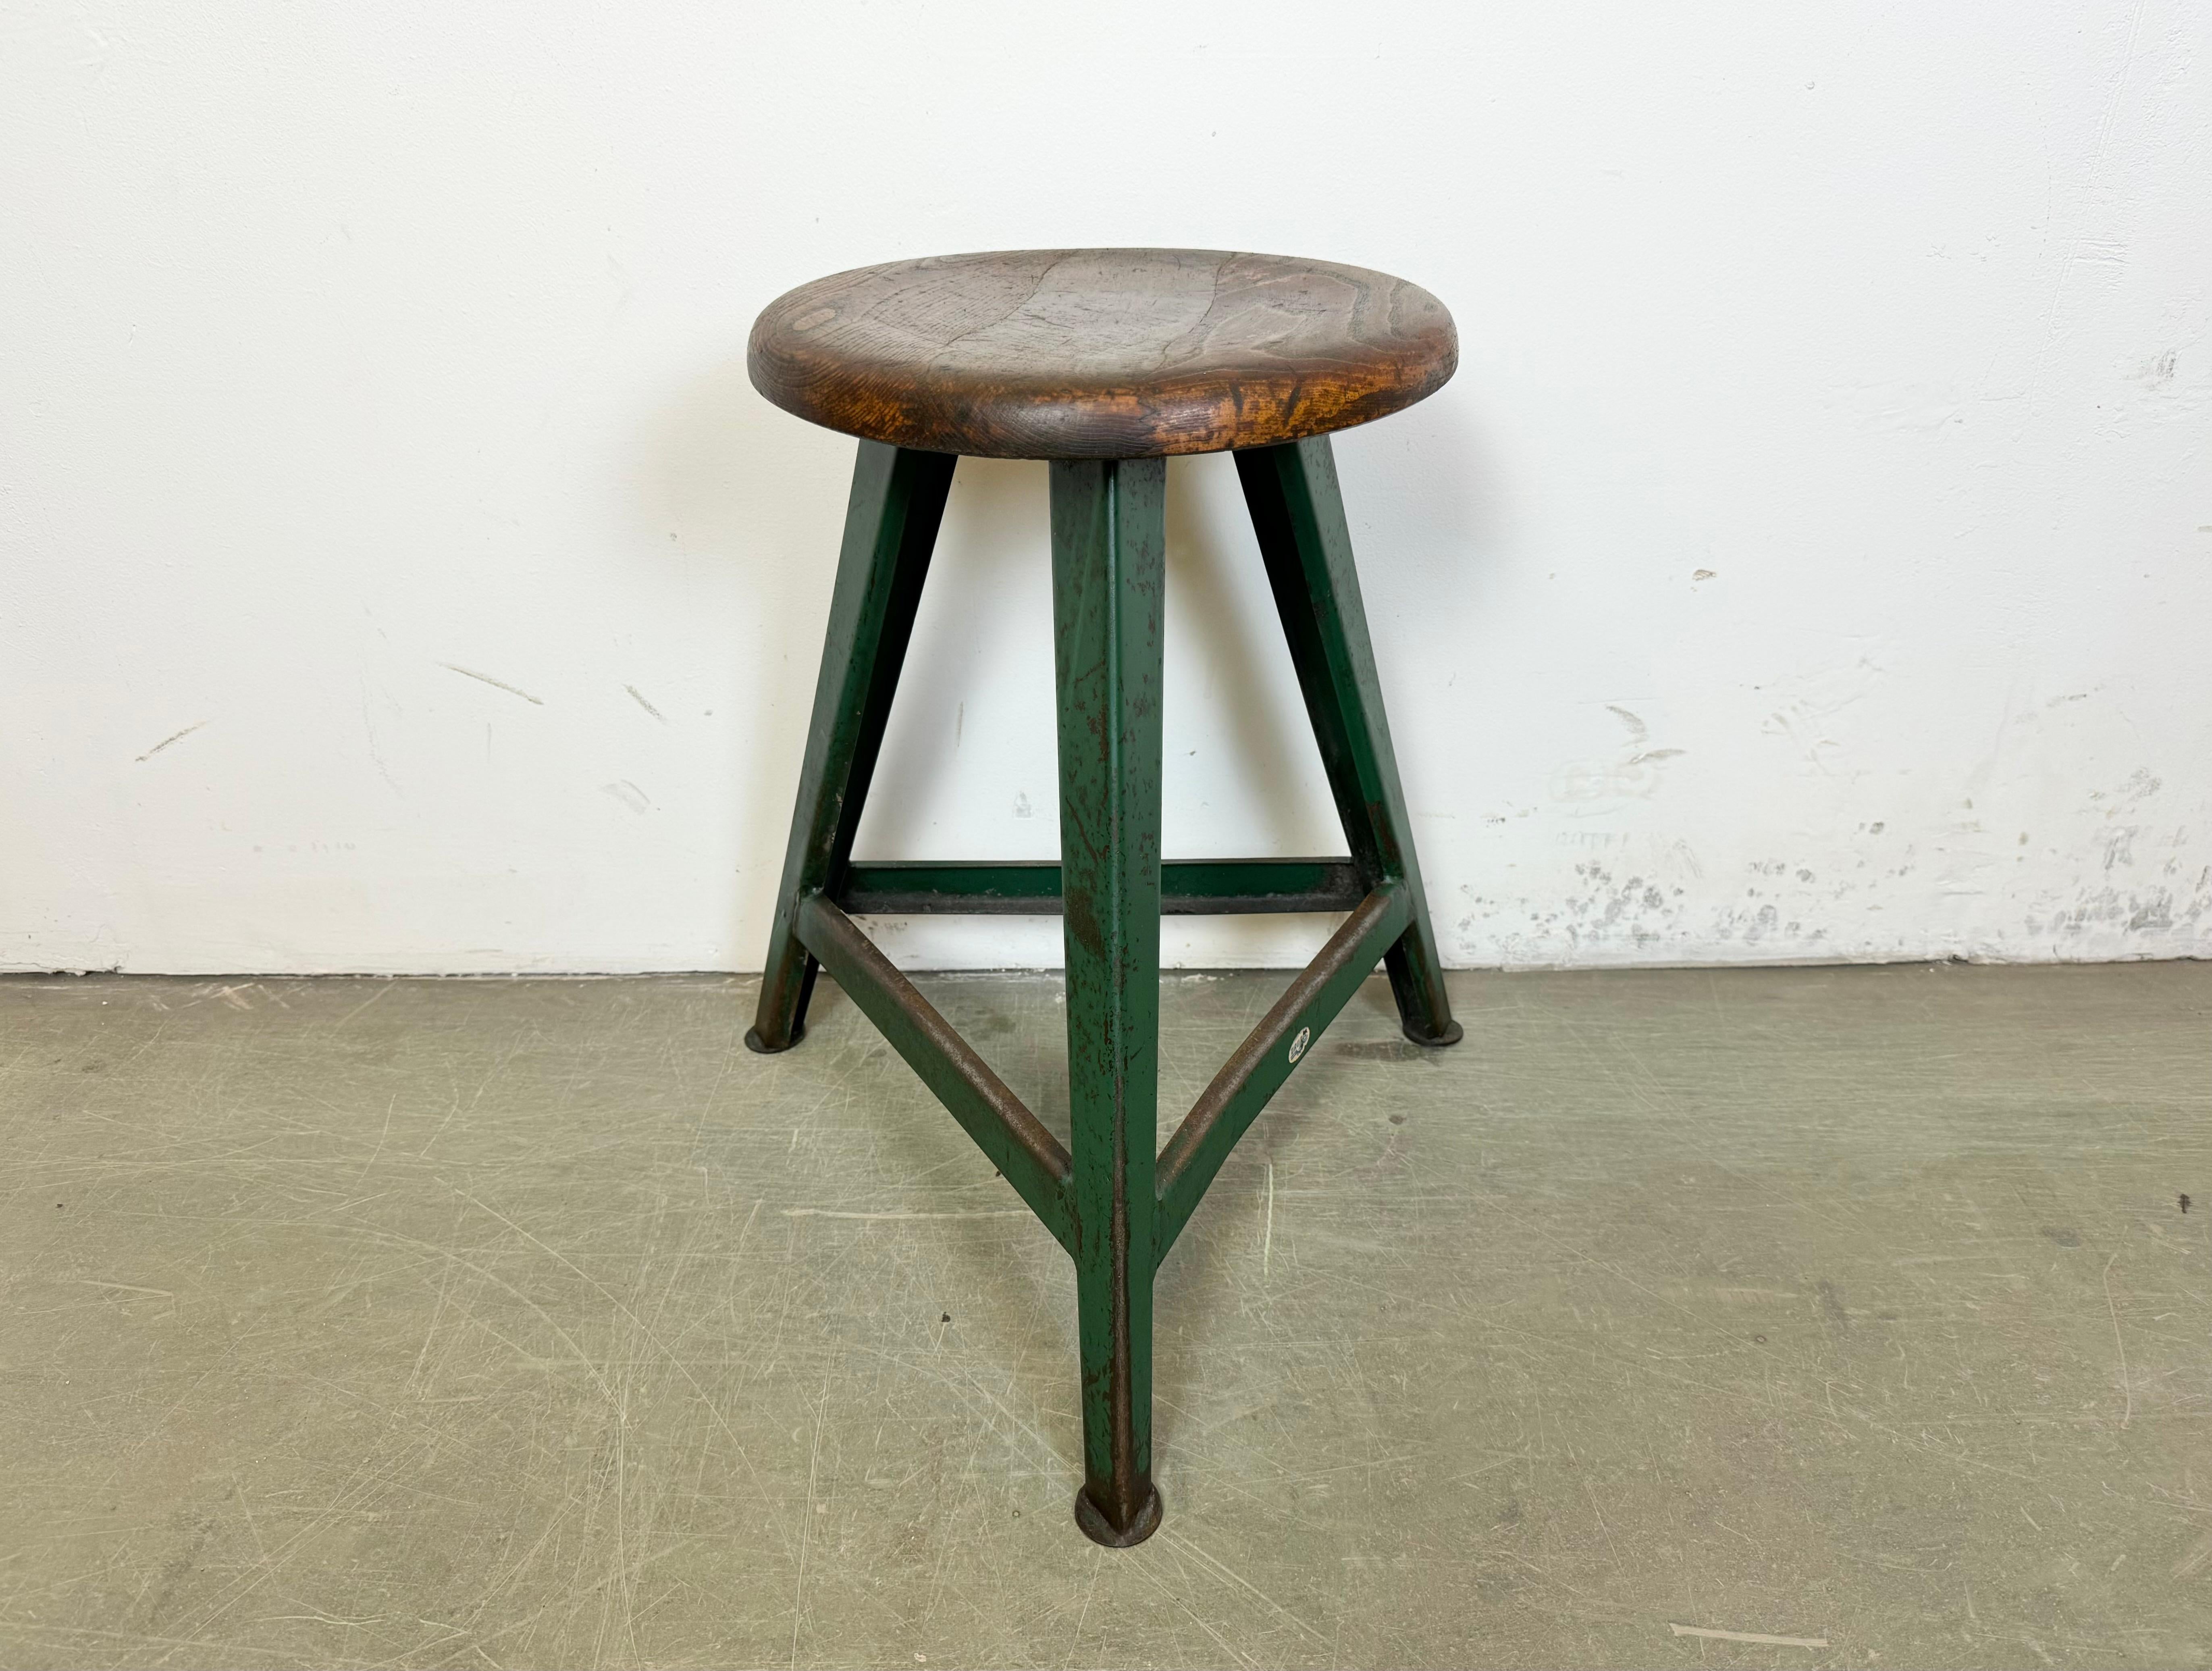 Vintage Industrial factory stool made by Drupol in former Czechoslovakia during the 1960s It features a wooden seat and a green metal frame. The weight of the stool is 3,8 kg.The diameter of the seat is 31 cm.